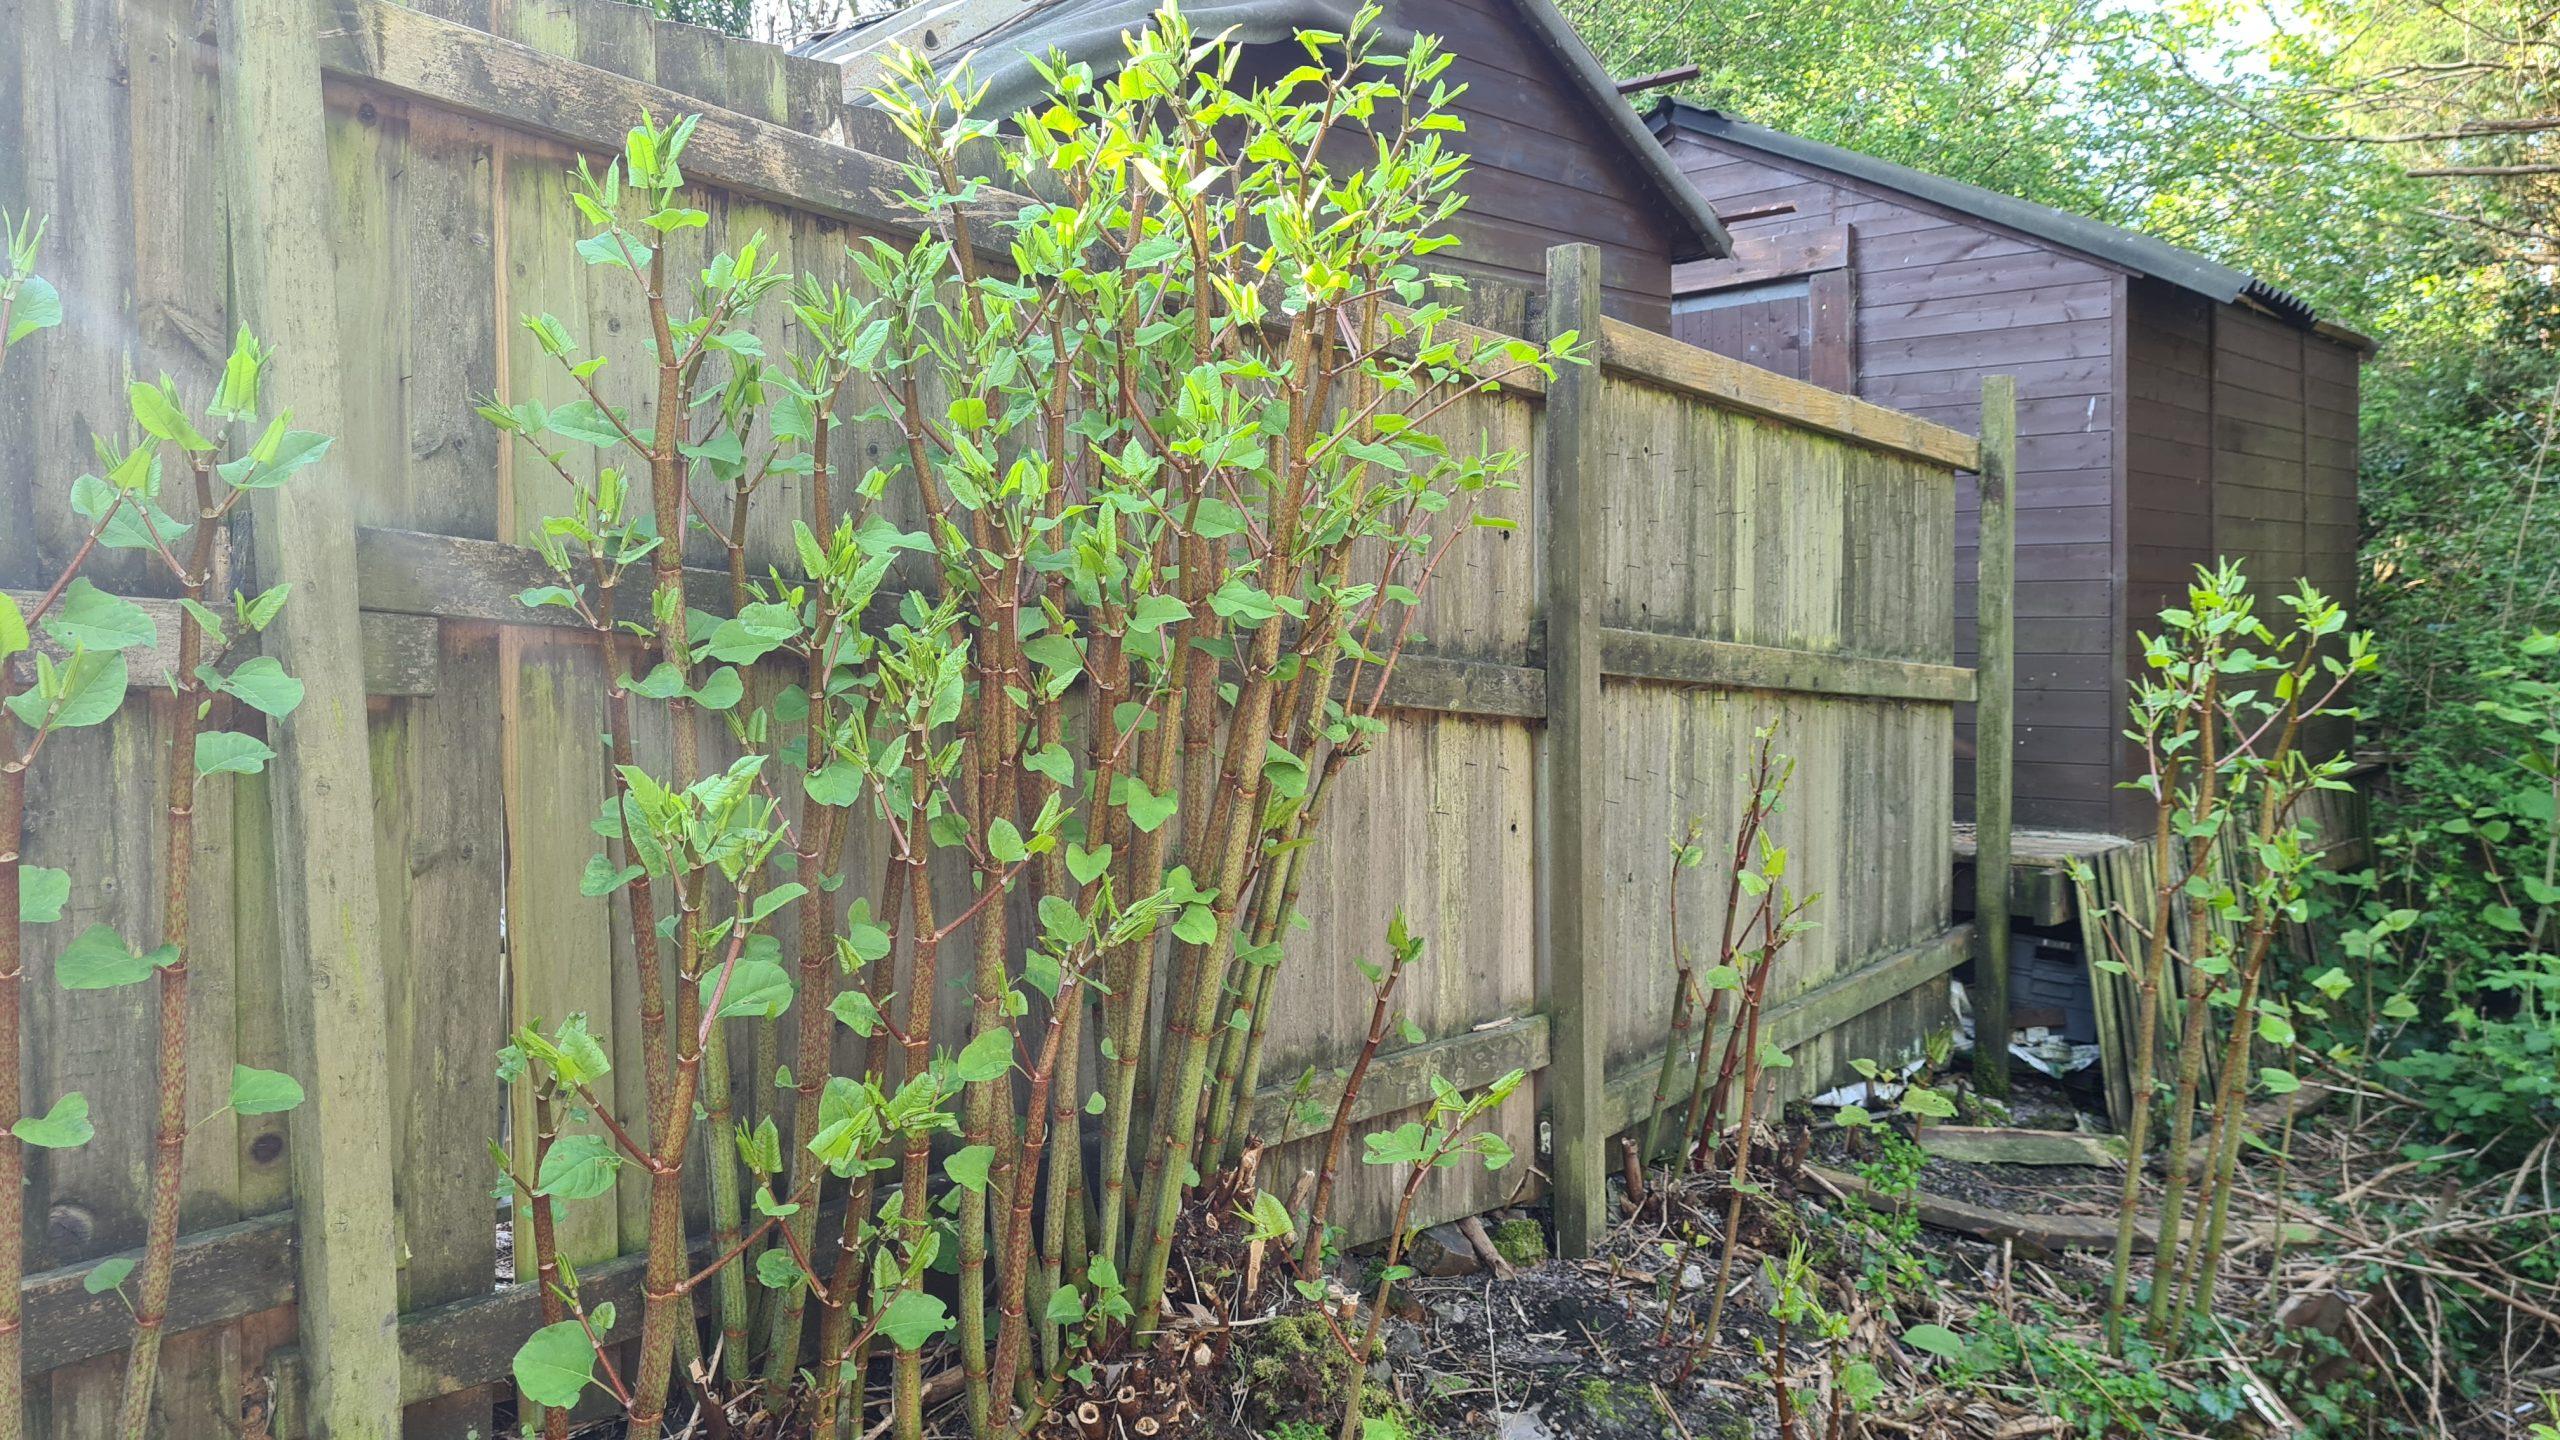 New Japanese knotweed shoots manage to colonise existing crowns year after year